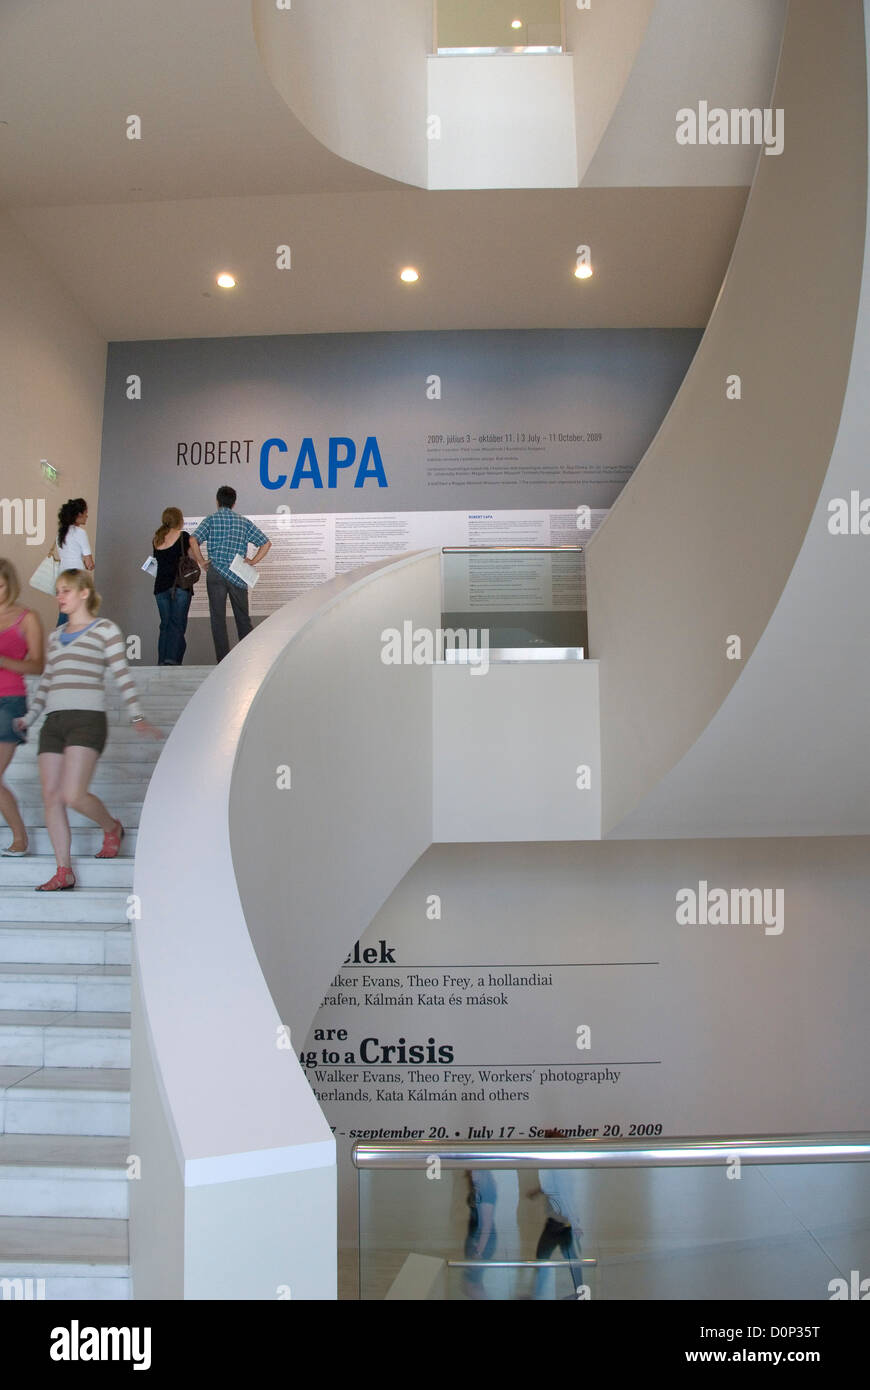 Robert Capa exhibition, visitors on stairs, Ludwig Museum, Museum of Contemporary Art, Budapest, Hungary, Europe Stock Photo